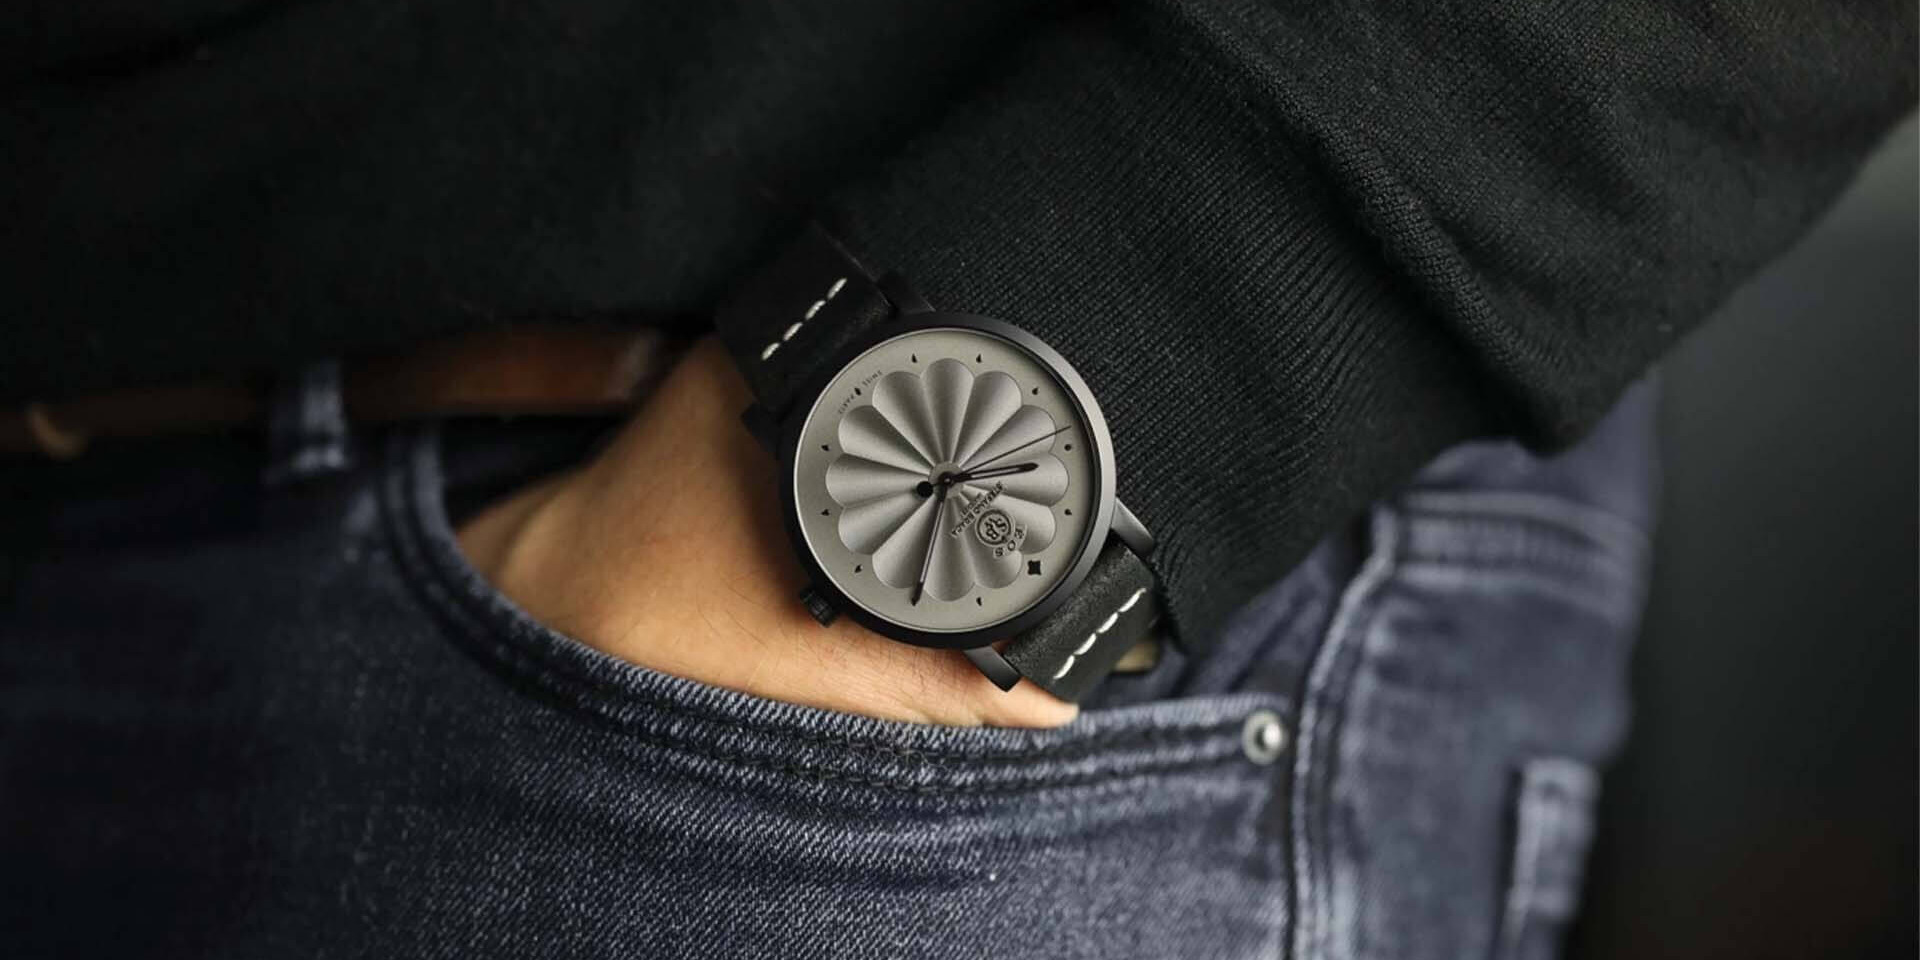 Stefano Braga Watches: The Perfect Combination of Aesthetics and Functionality